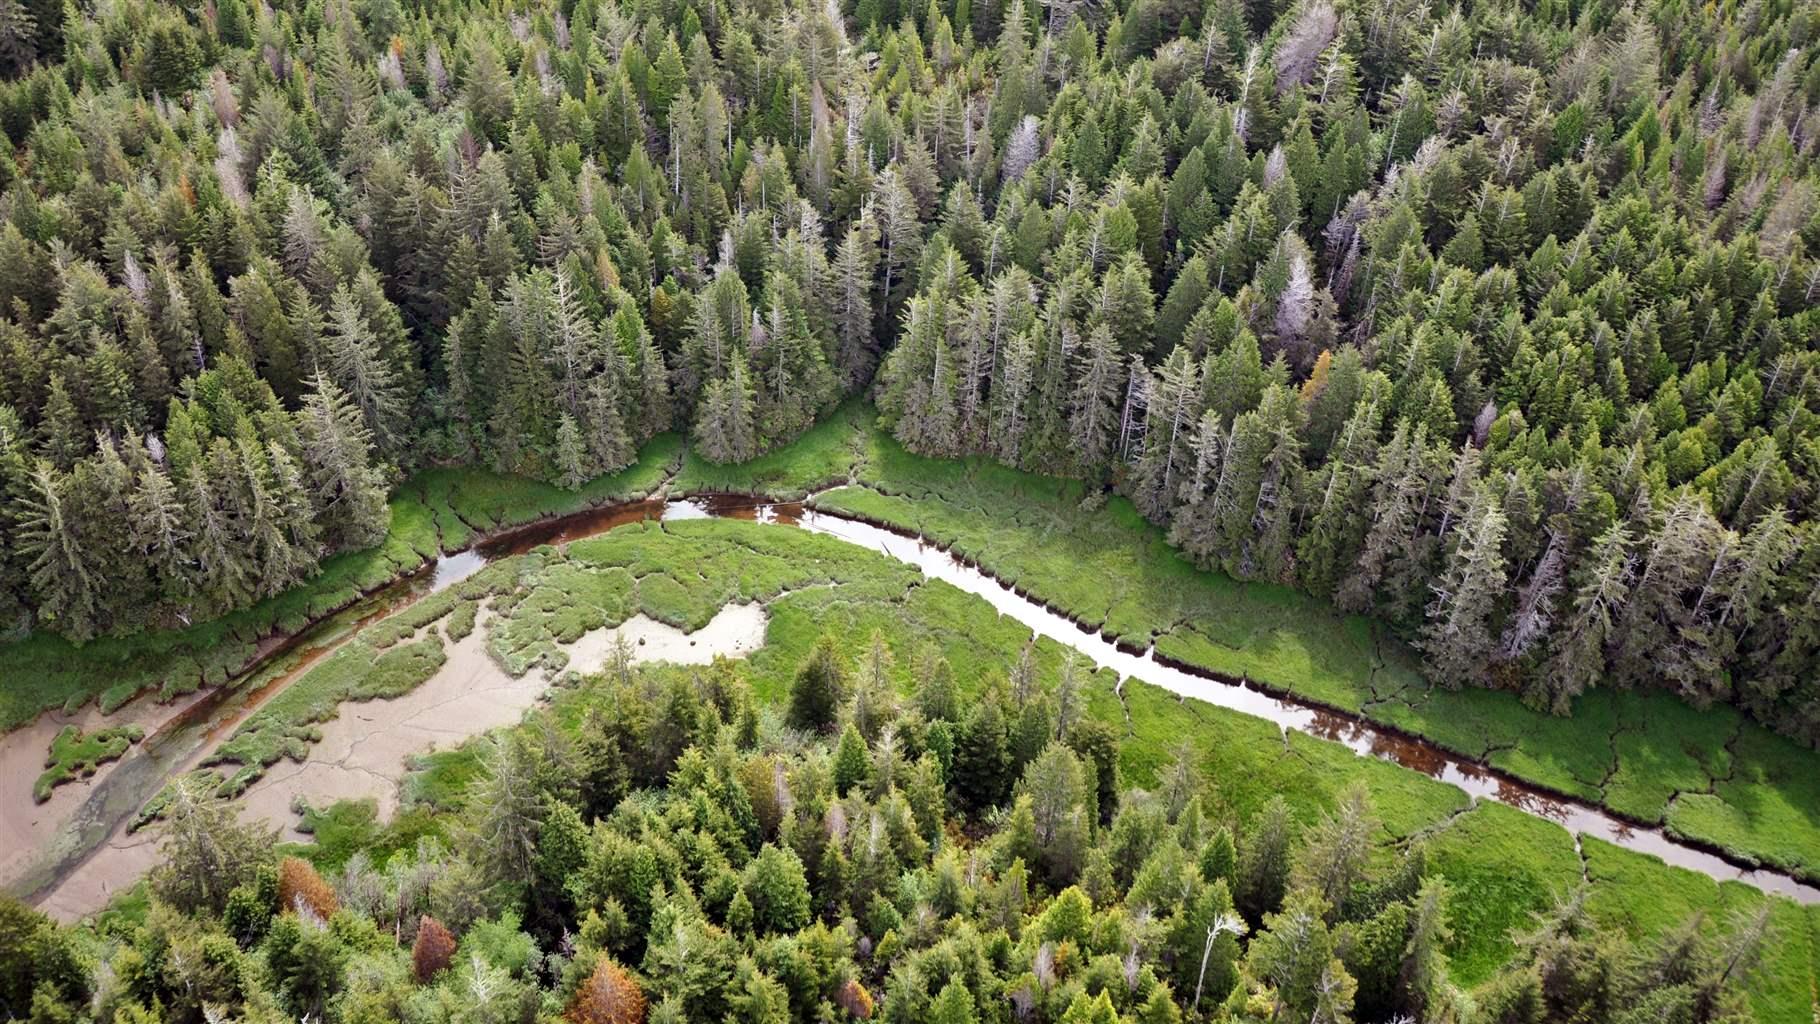 An aerial photo shows a snaking body of water flowing through woods.  